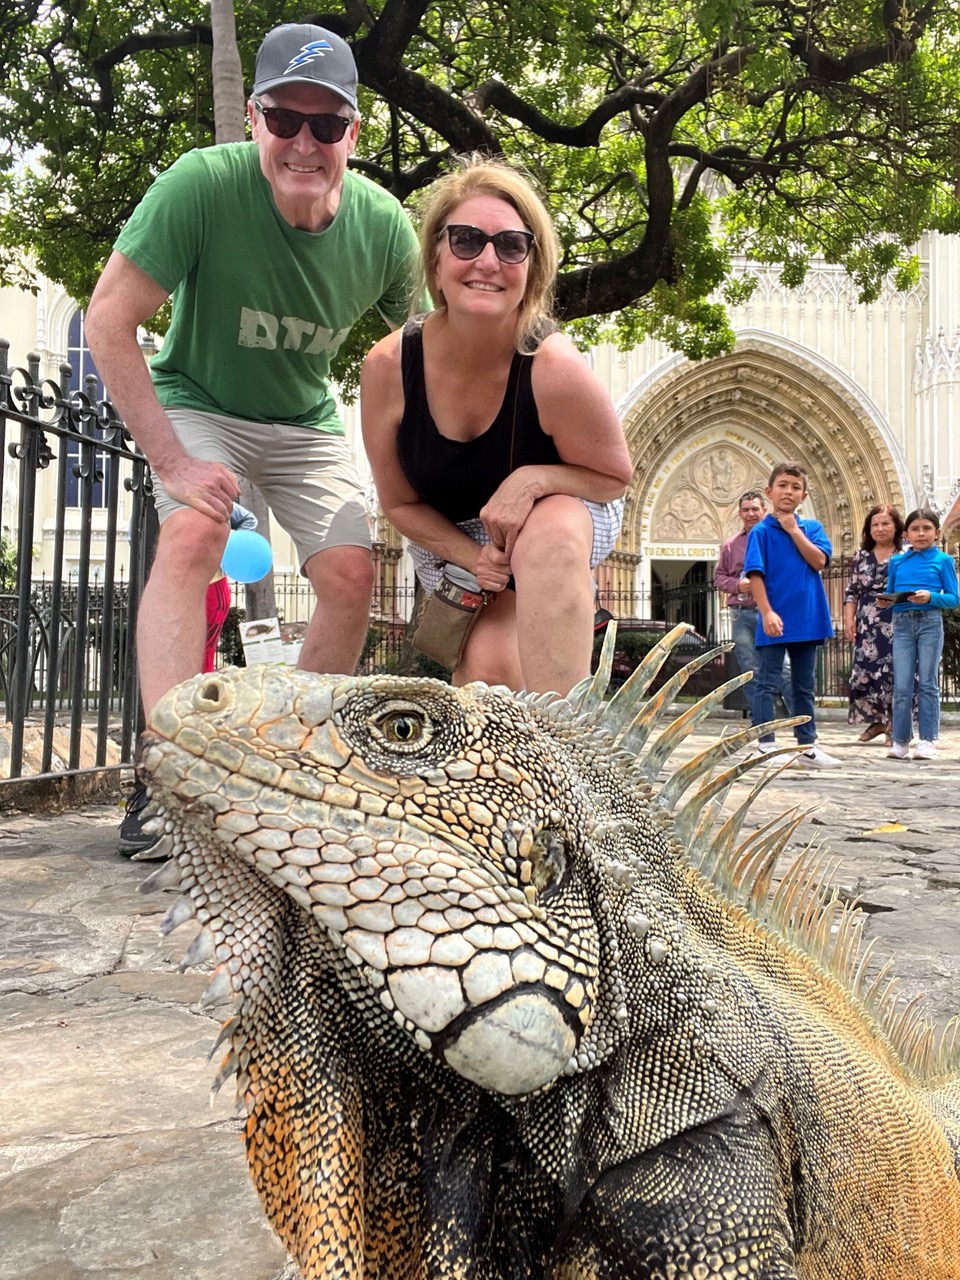 Roberson and his wife posing outdoors for a picture with an iguana in the foreground